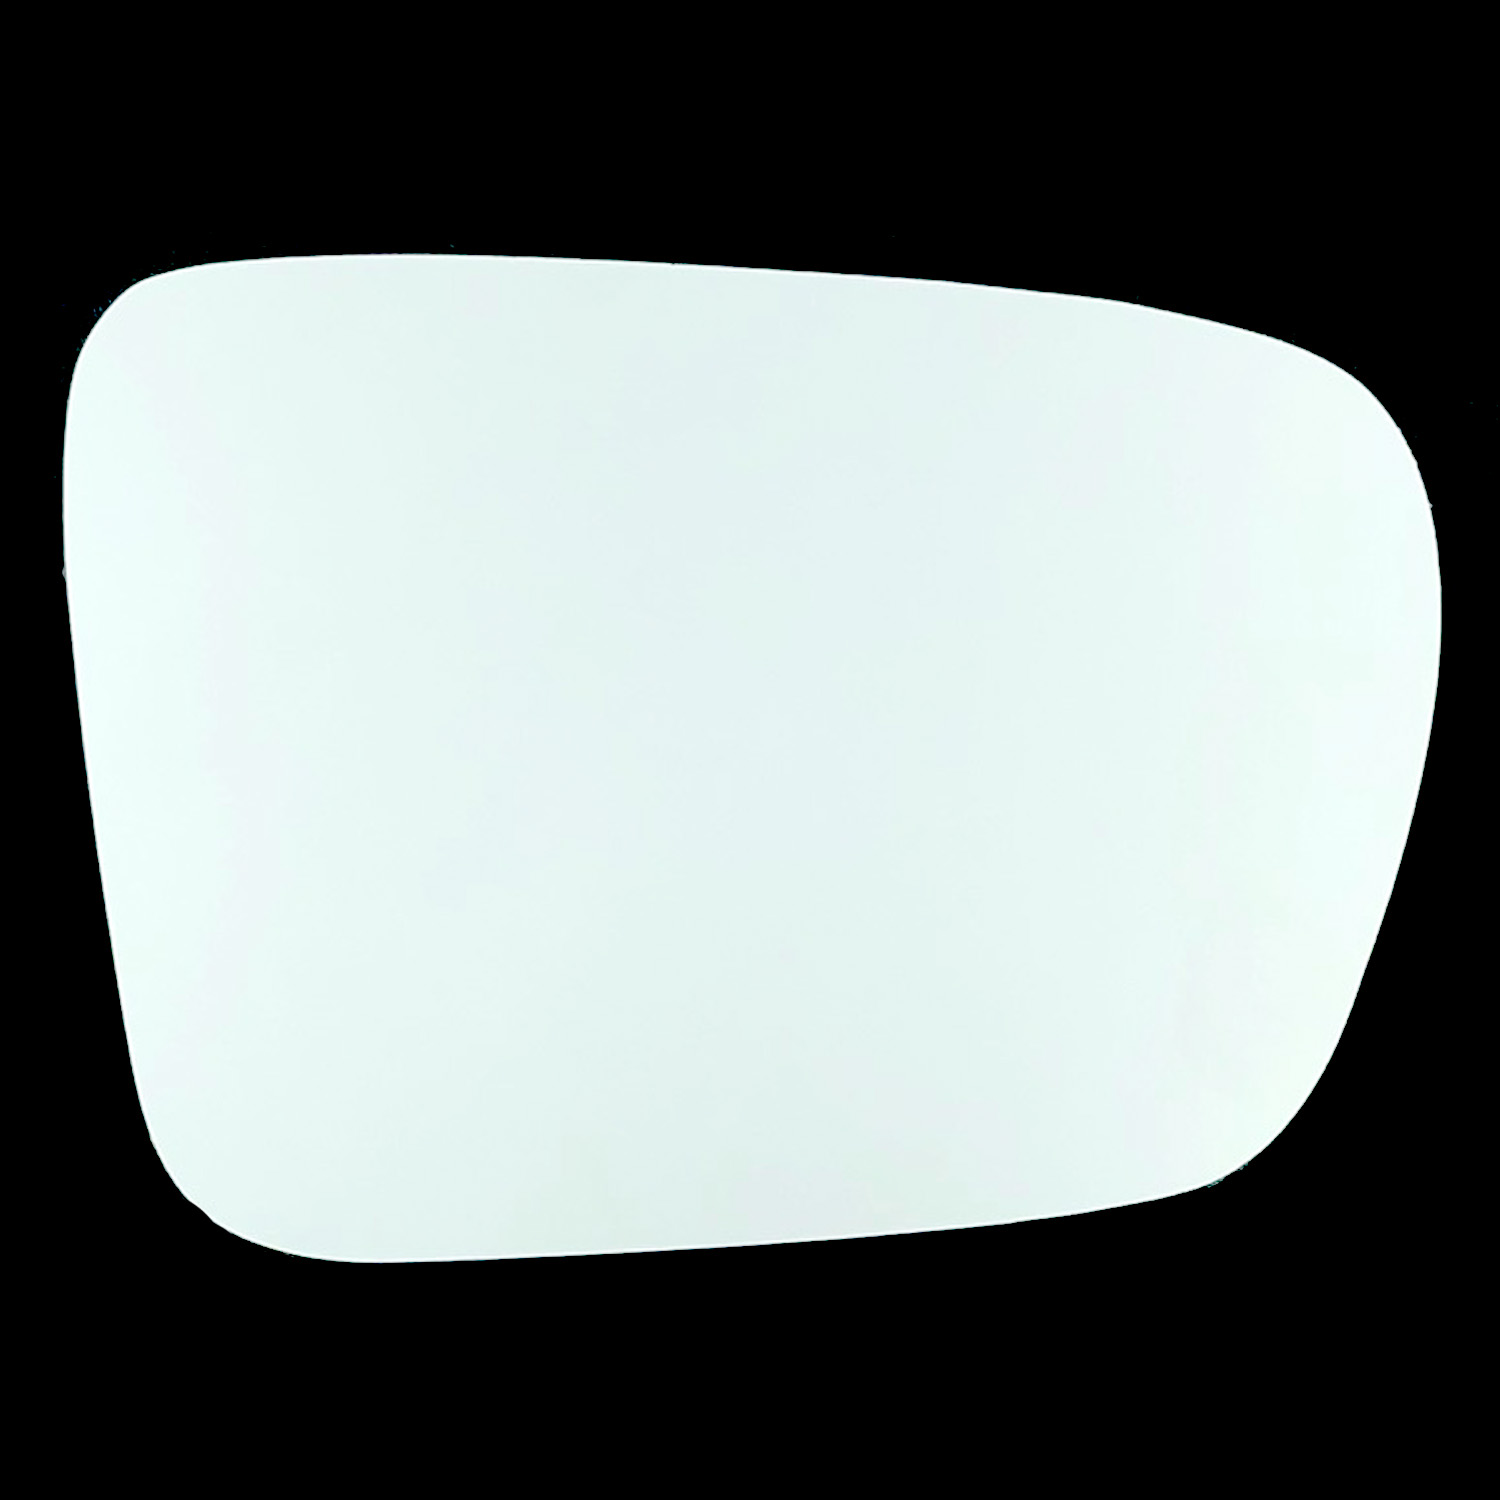 Lexus LS 460 Wing Mirror Glass LEFT HAND ( UK Passenger Side ) 2013 to 2020 – Wide Angle Wing Mirror